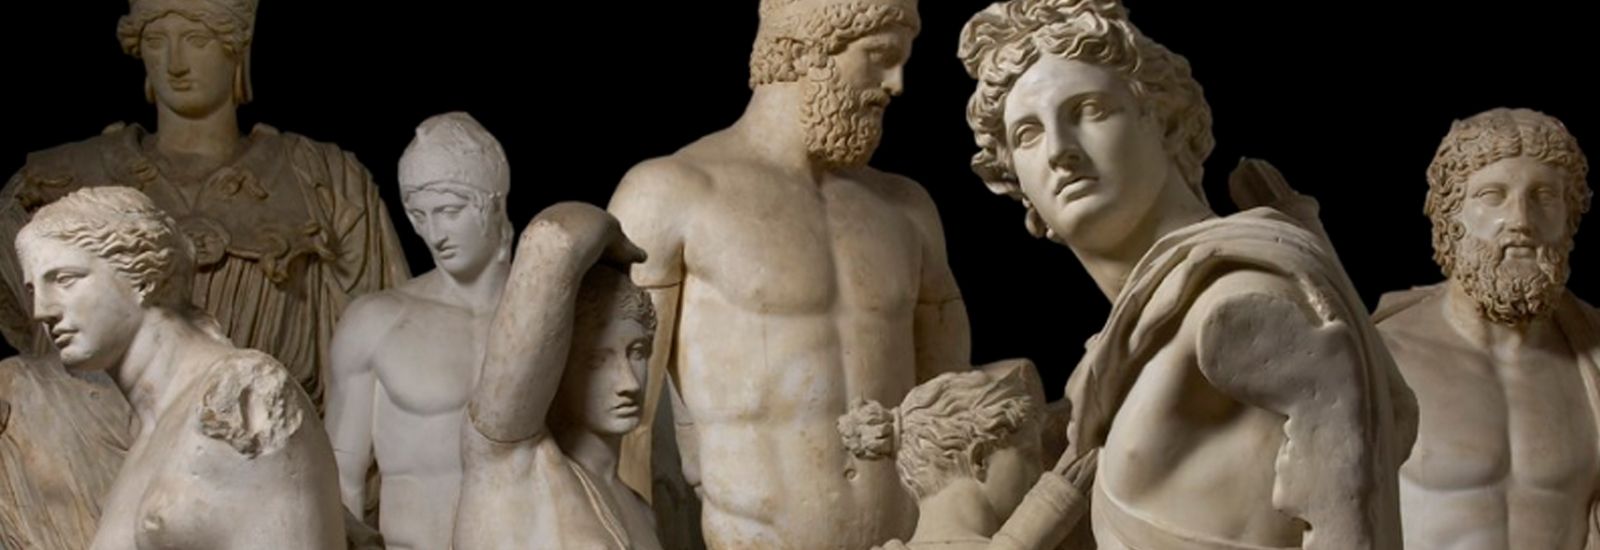 A collection of Greek statues in the Cast Gallery of the Ashmolean Museum 